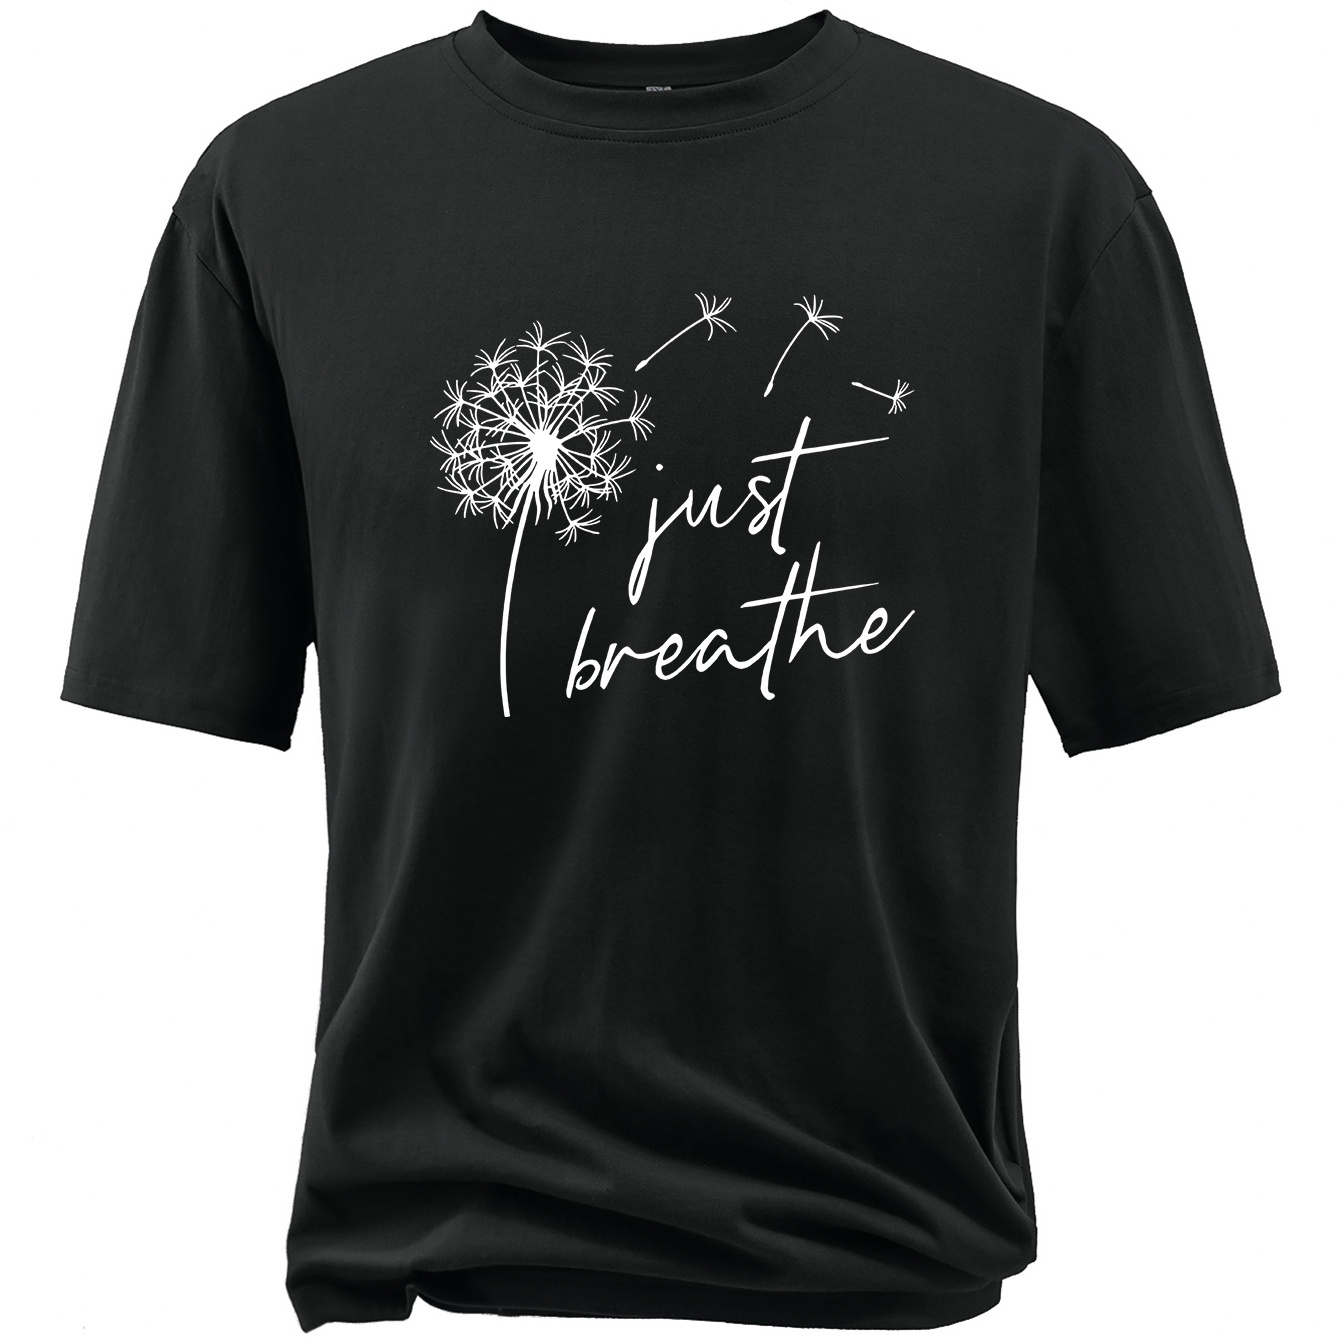 

Plus Size Men's Casual T-shirt, Just Breathe Print Short Sleeve Sports Tee Tops, Summer Clothes